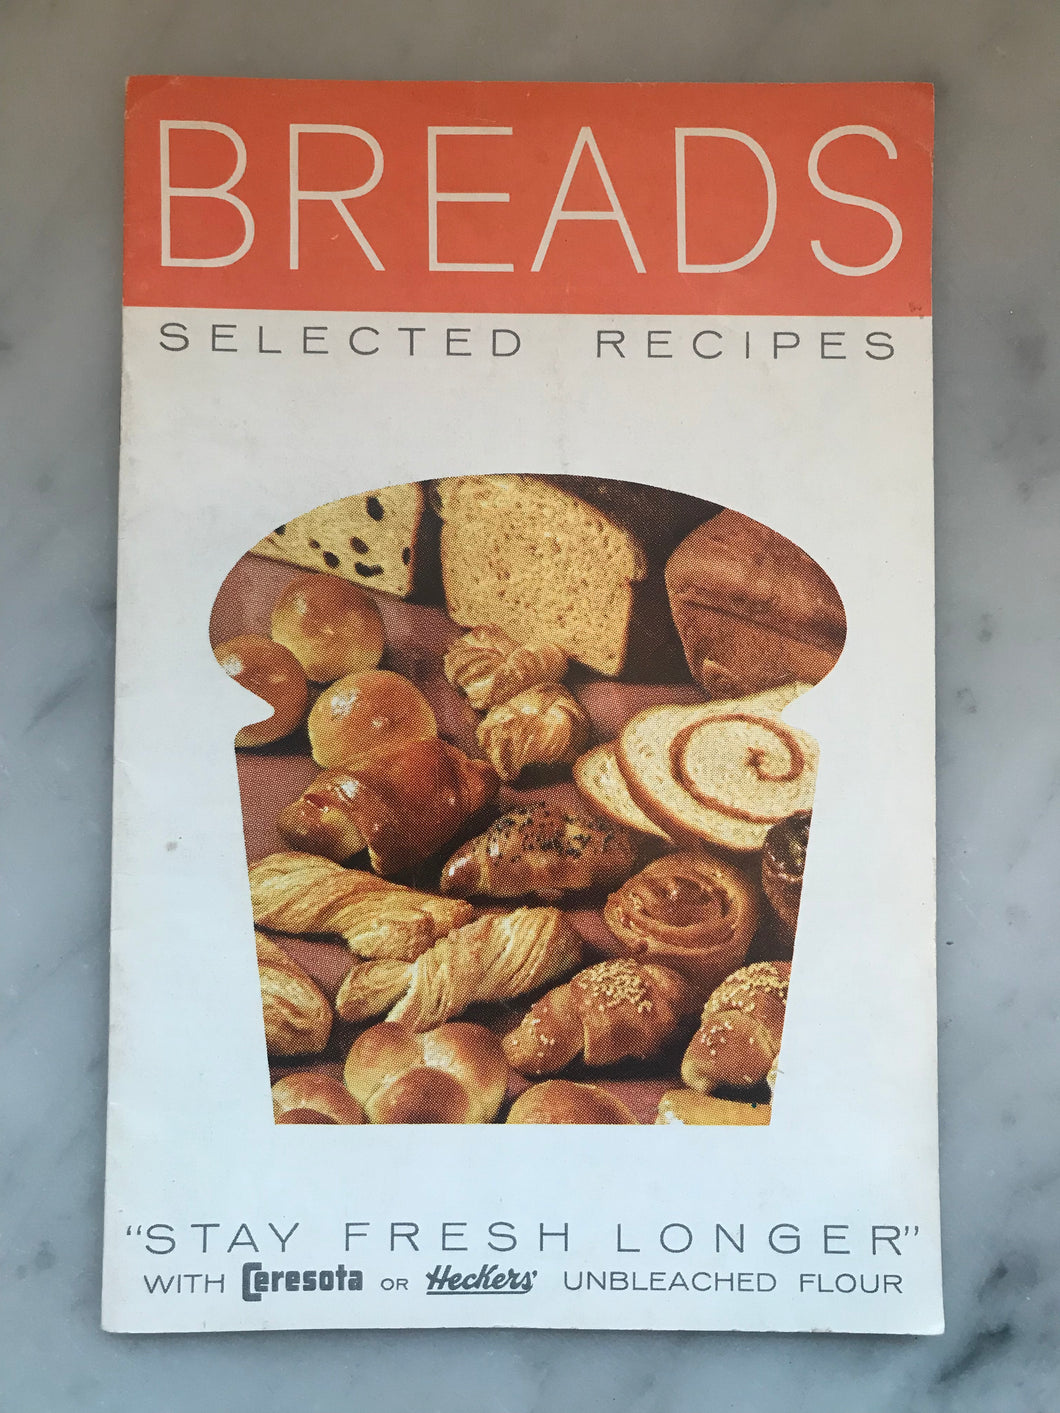 Breads, Selected Recipes